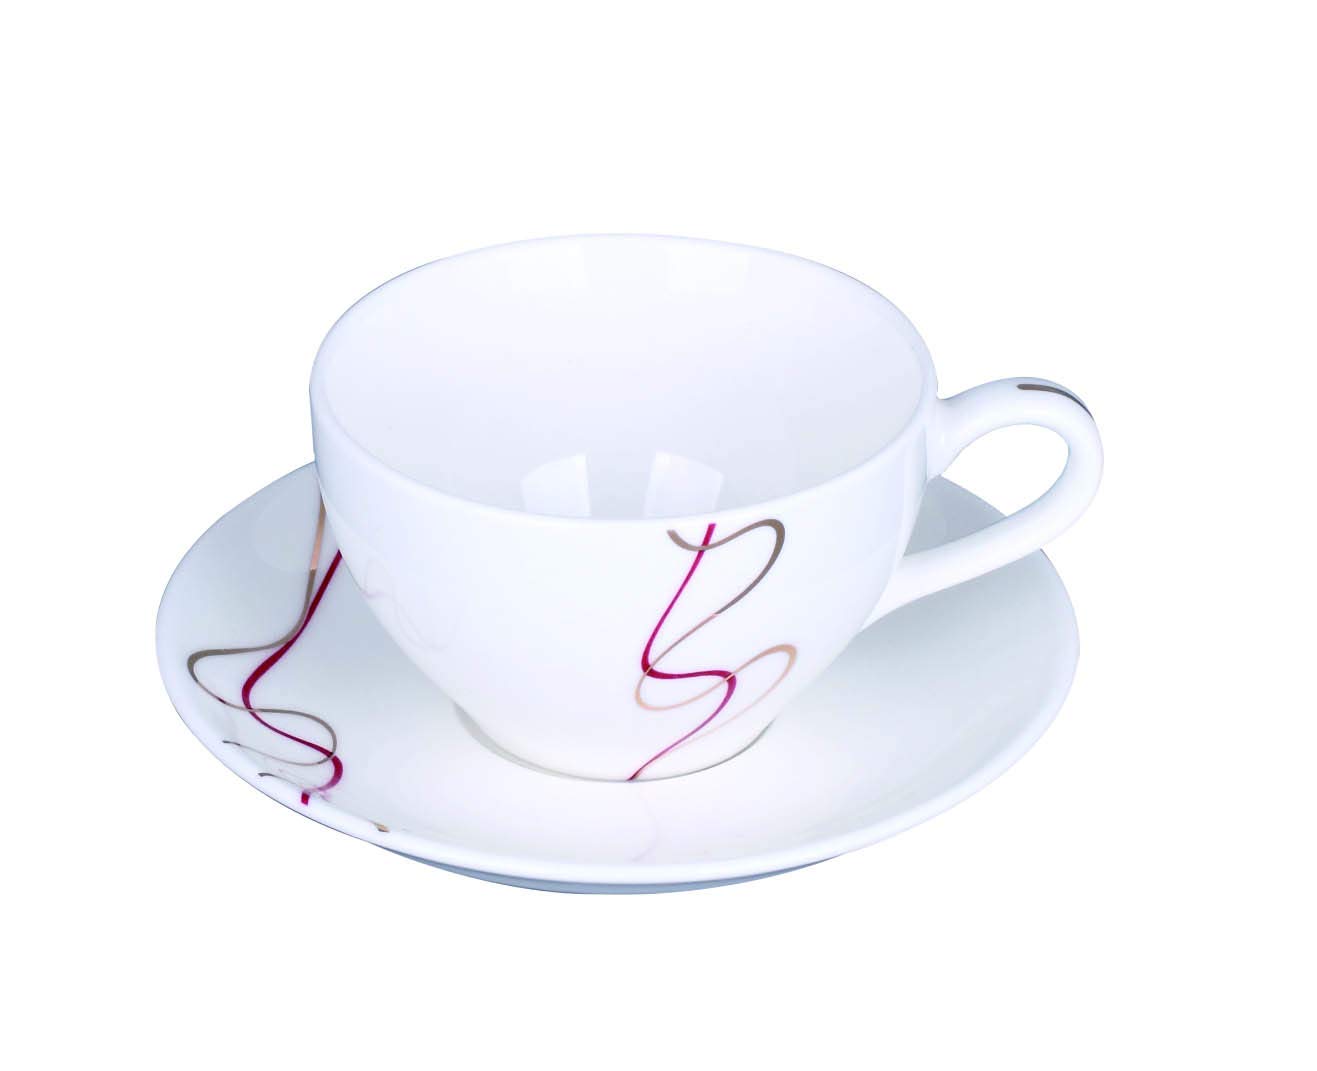 Royalford 12PCS Bone China Round Cup & Saucer Set – Ideal for Daily Use – Non-Toxic, Ecologically Tasteless, Smooth Surface, Translucent, Comfortable Grip and Lightweight رويال فورد طقم اكواب وصحون دائرية من 12 قطعة من الخزف الصيني